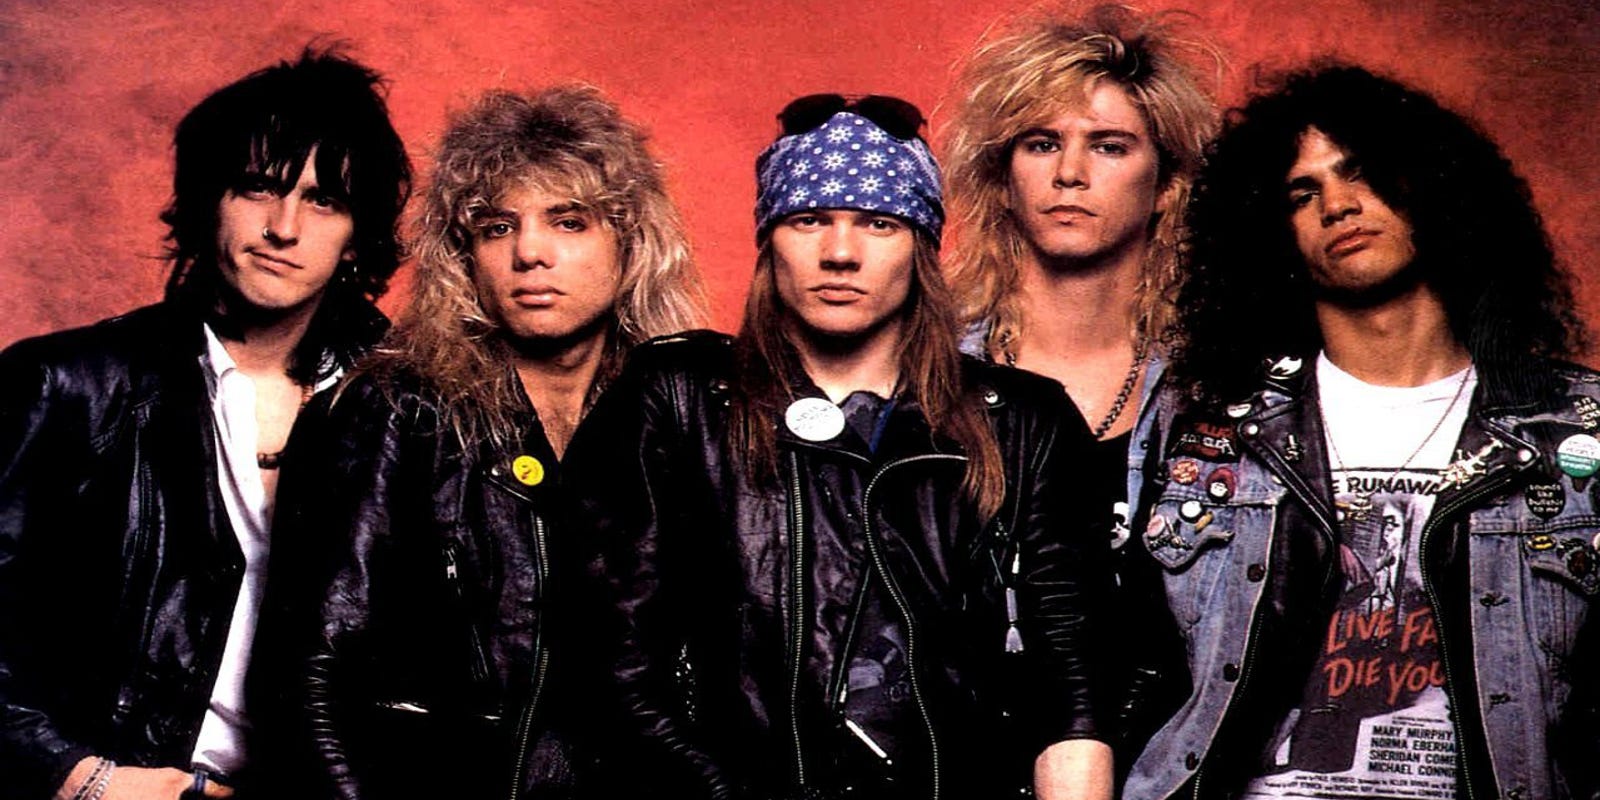 Guns N’ Roses, Hard Rock Metal( one of the Most known Metal Bands)